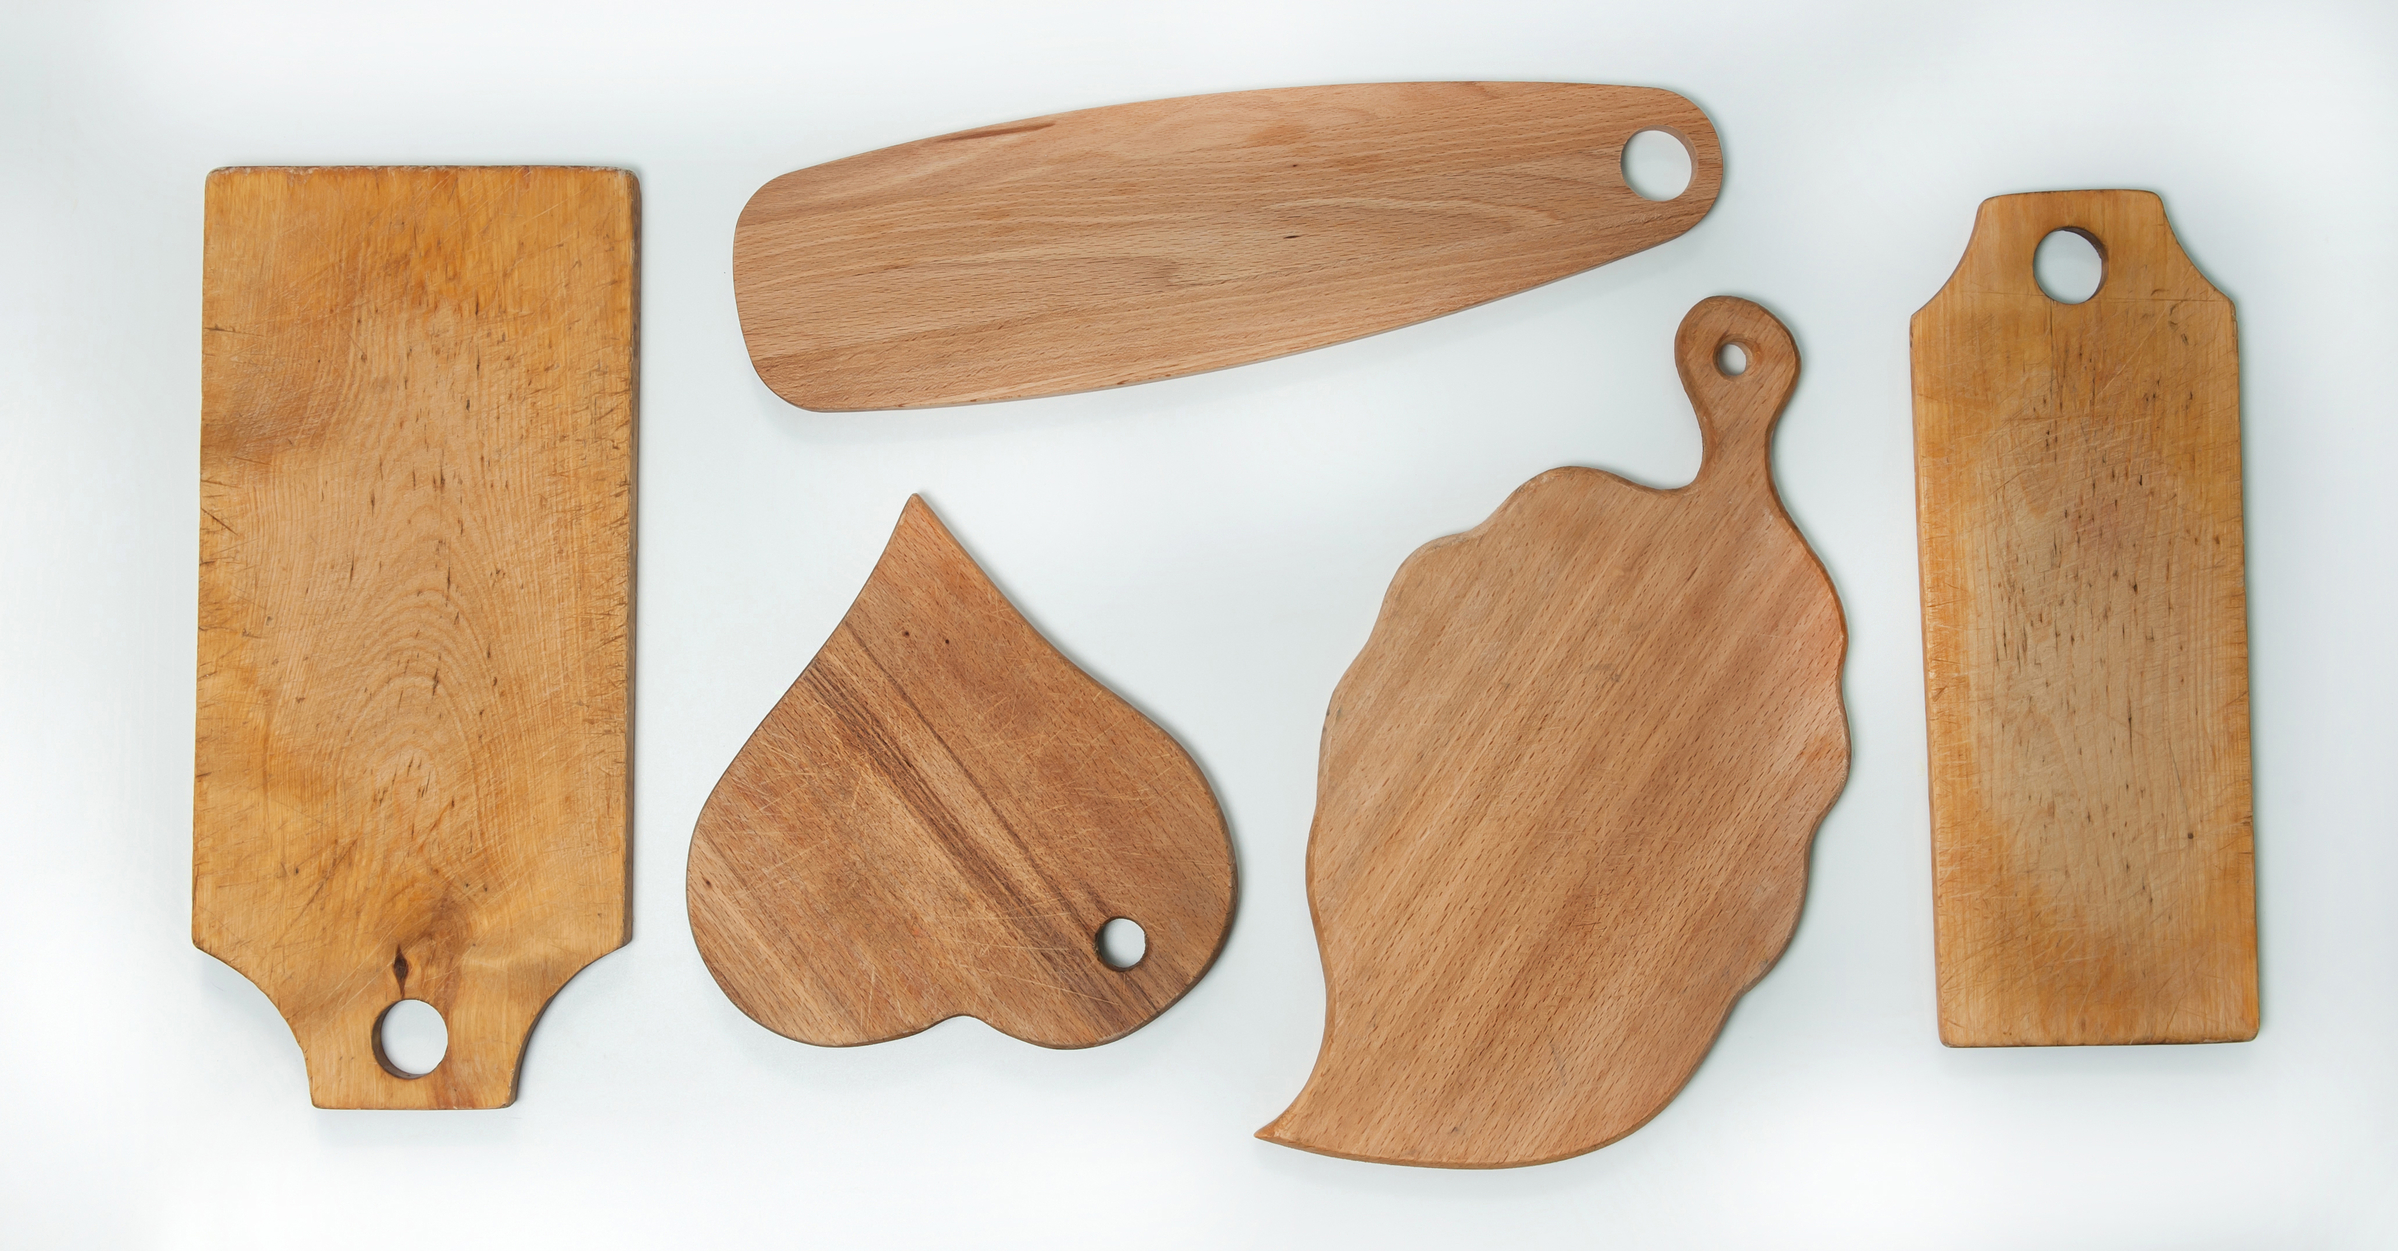 different shapes and sizes of cutting boards